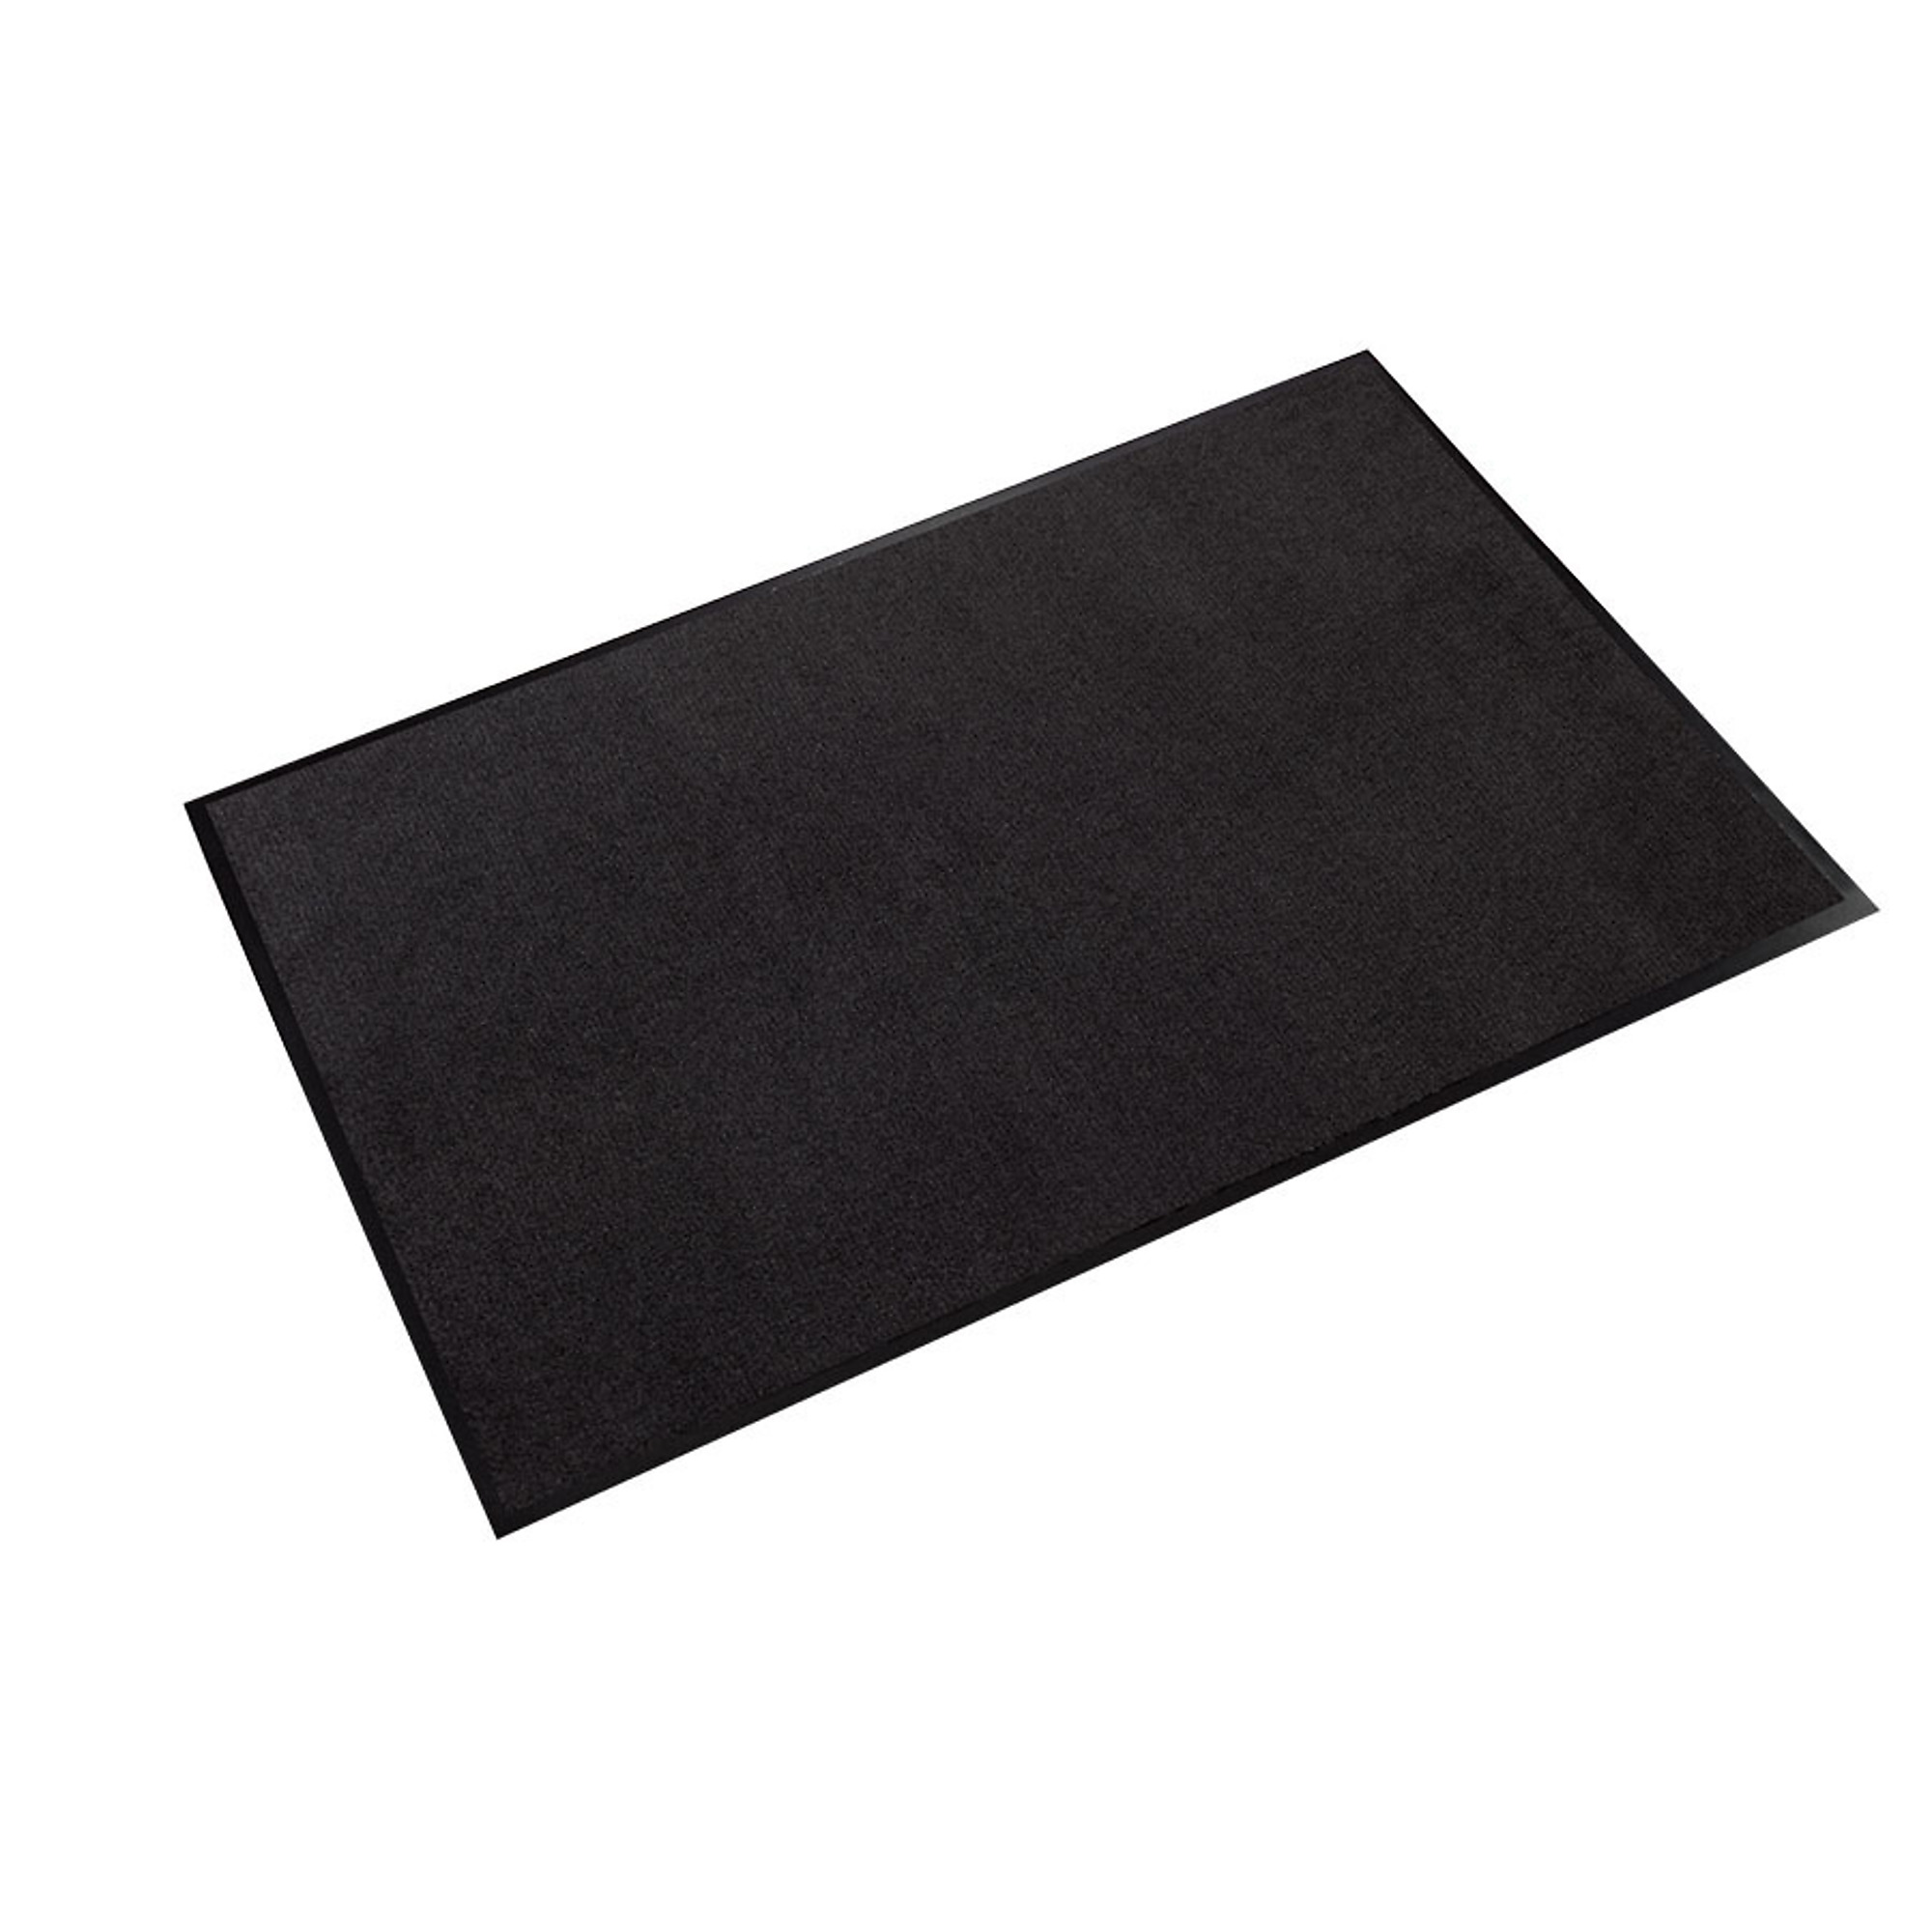 Crown Matting Technologies, Rely-On Olefin 3ft.x60ft. Black, Width 36 in, Length 720 in, Thickness 3/8 in, Model GSR0036BK